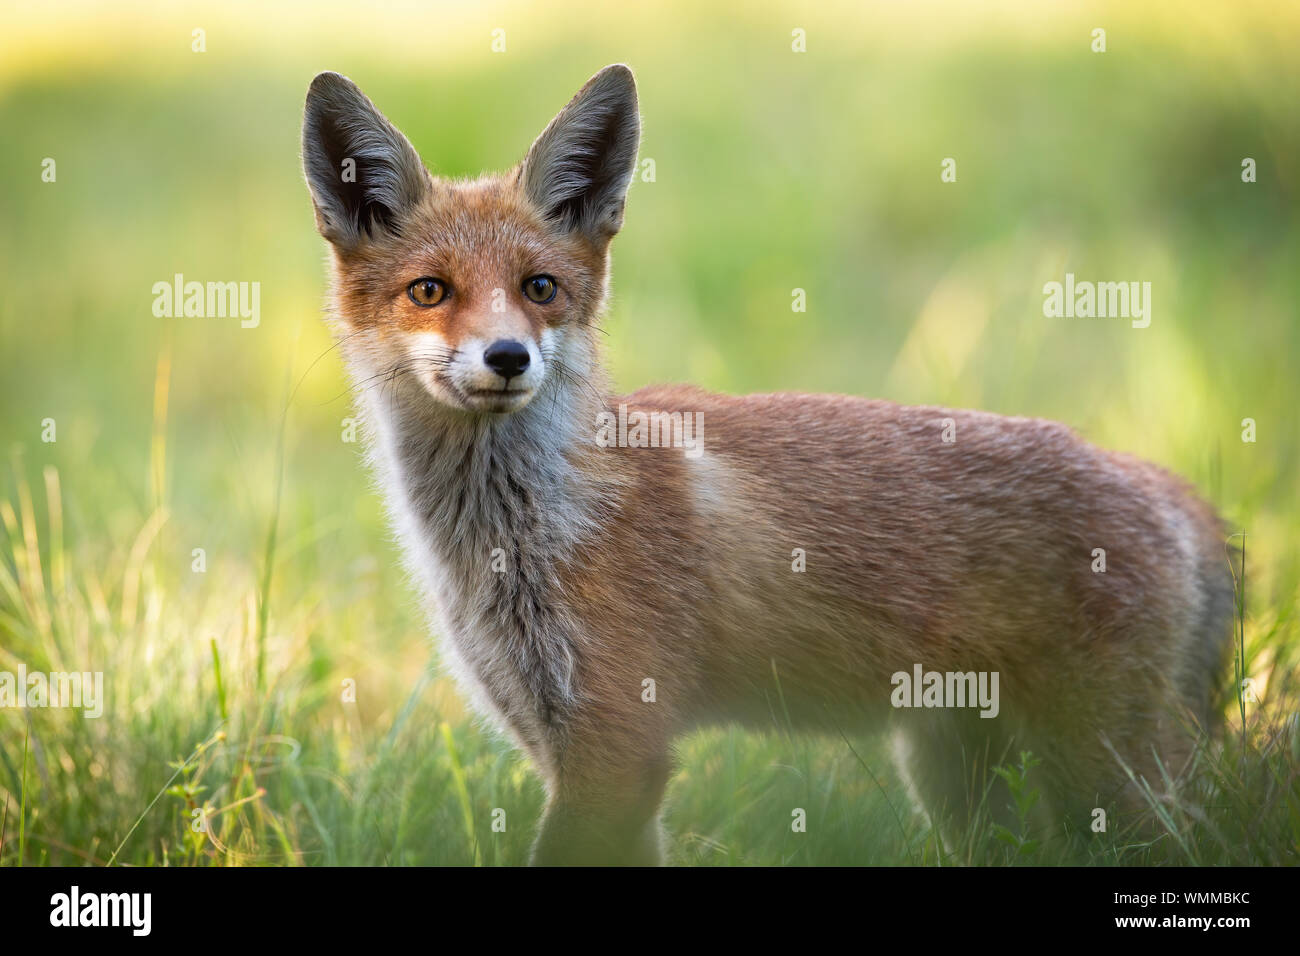 Wild alerted fox facing camera with ears oriented forward listening intensely. Stock Photo